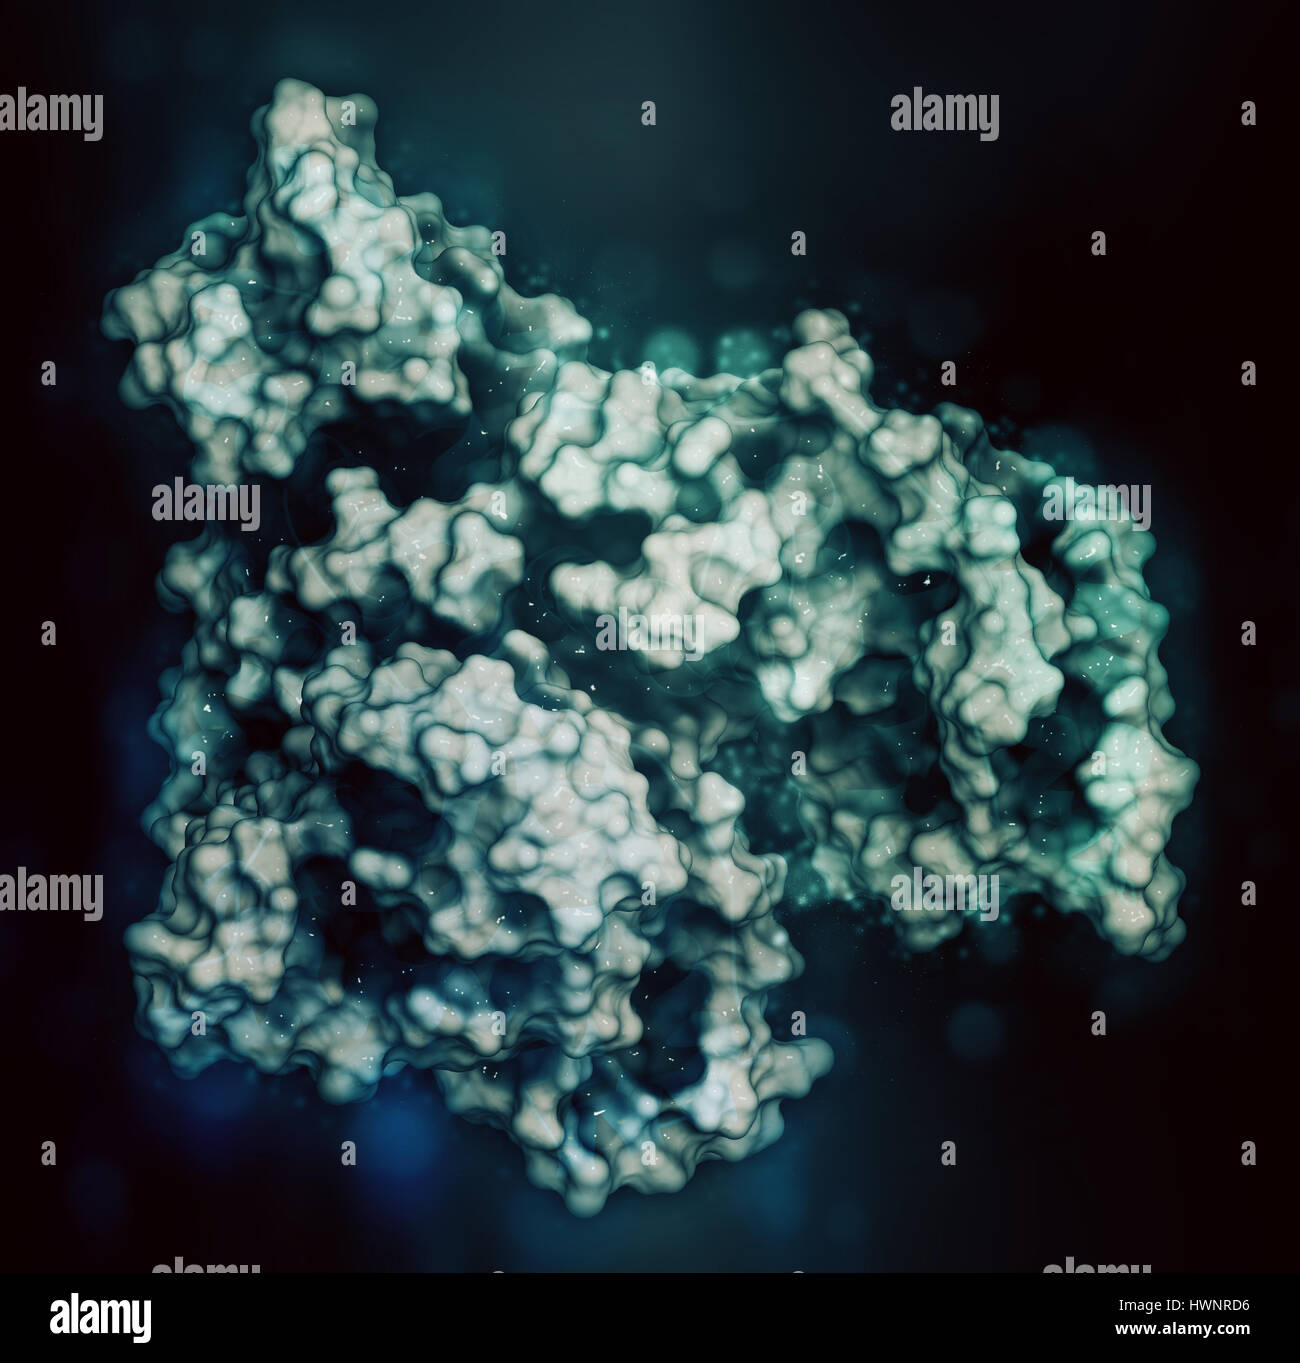 Human serum albumin protein, 3D rendering. Cartoon representation combined with semi-transparent surfaces. Stock Photo